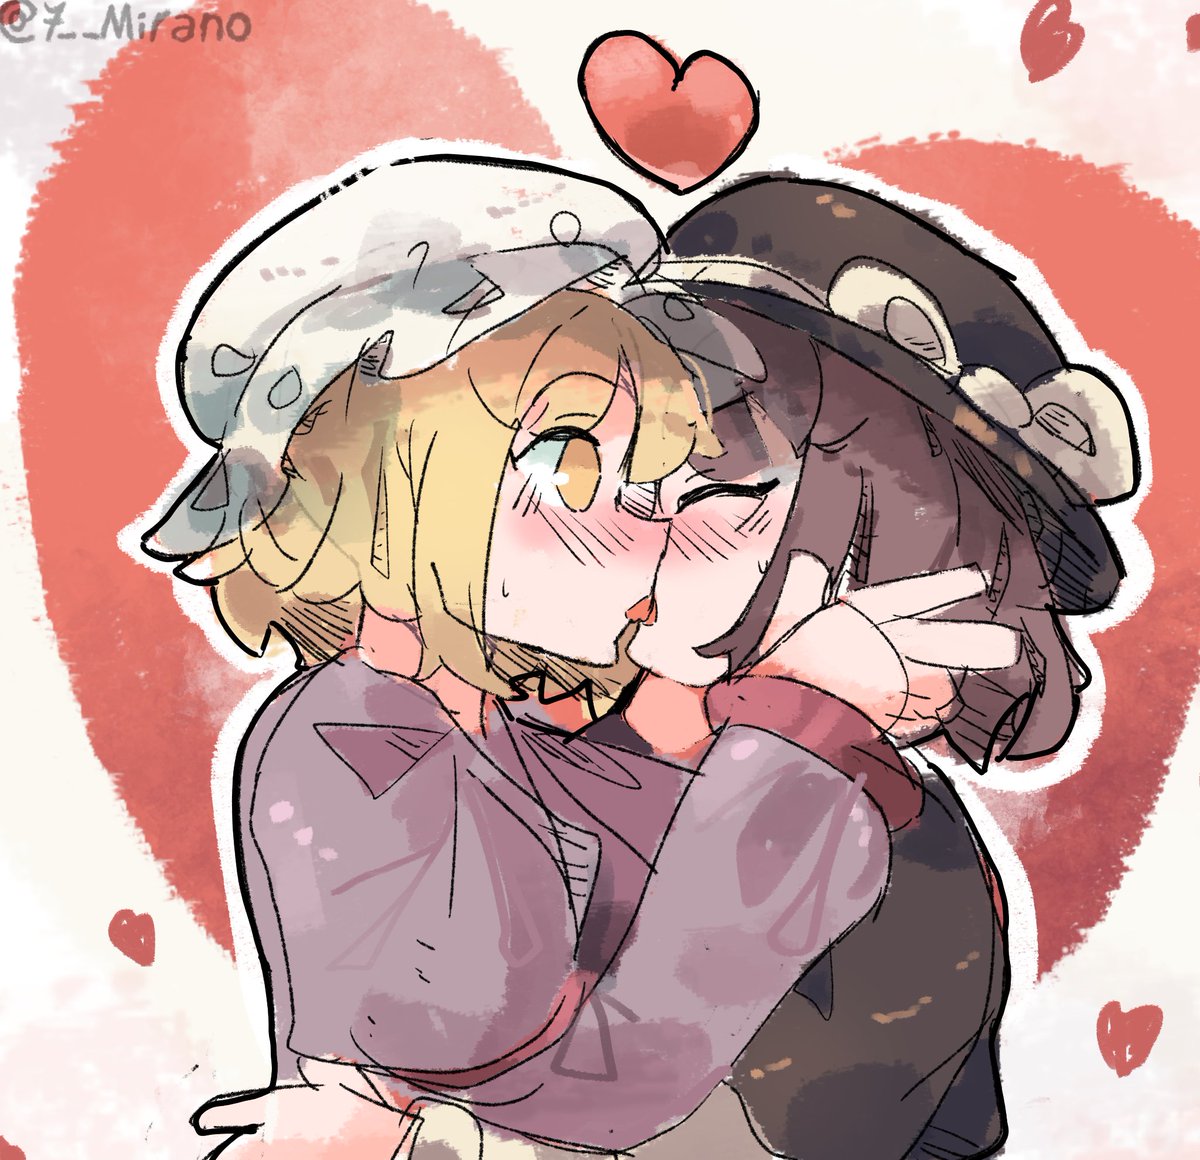 ◆ Renko x Mari kiss 😚
◆ Day 218 of daily posting #東方Project #touhou